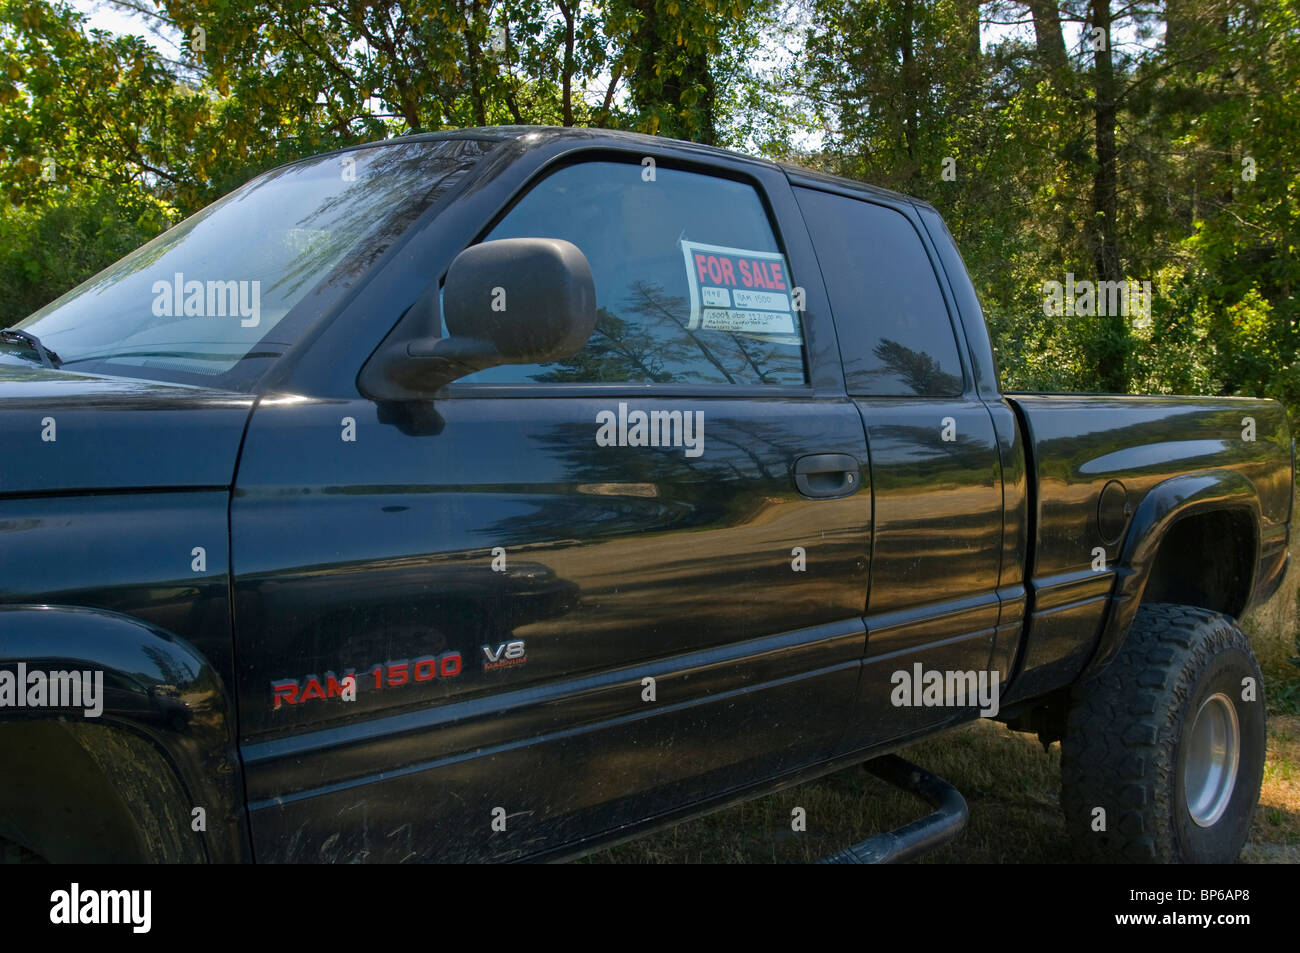 Large V8 Dodge Ram gas guzzler oversize pickup truck being sold during fuel gas price crisis Summer 2008, California Stock Photo